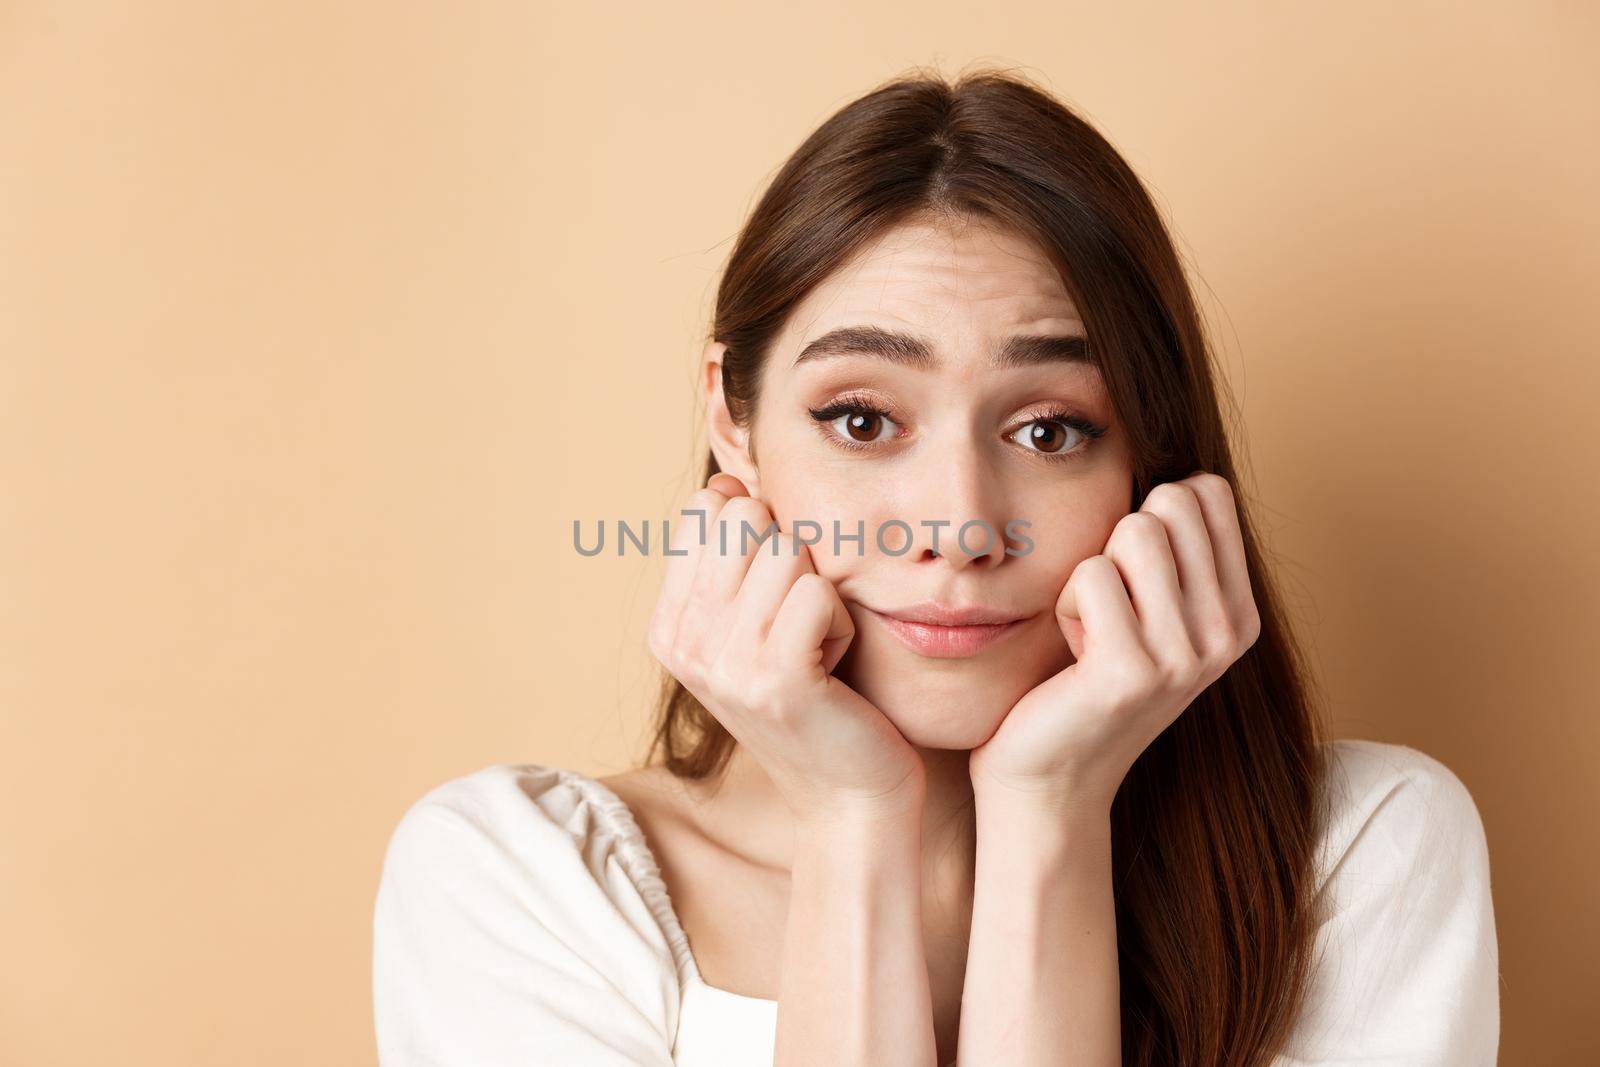 Close-up of cute and pretty girl lean face on hands, looking at camera with dreamy smile, standing on beige background.